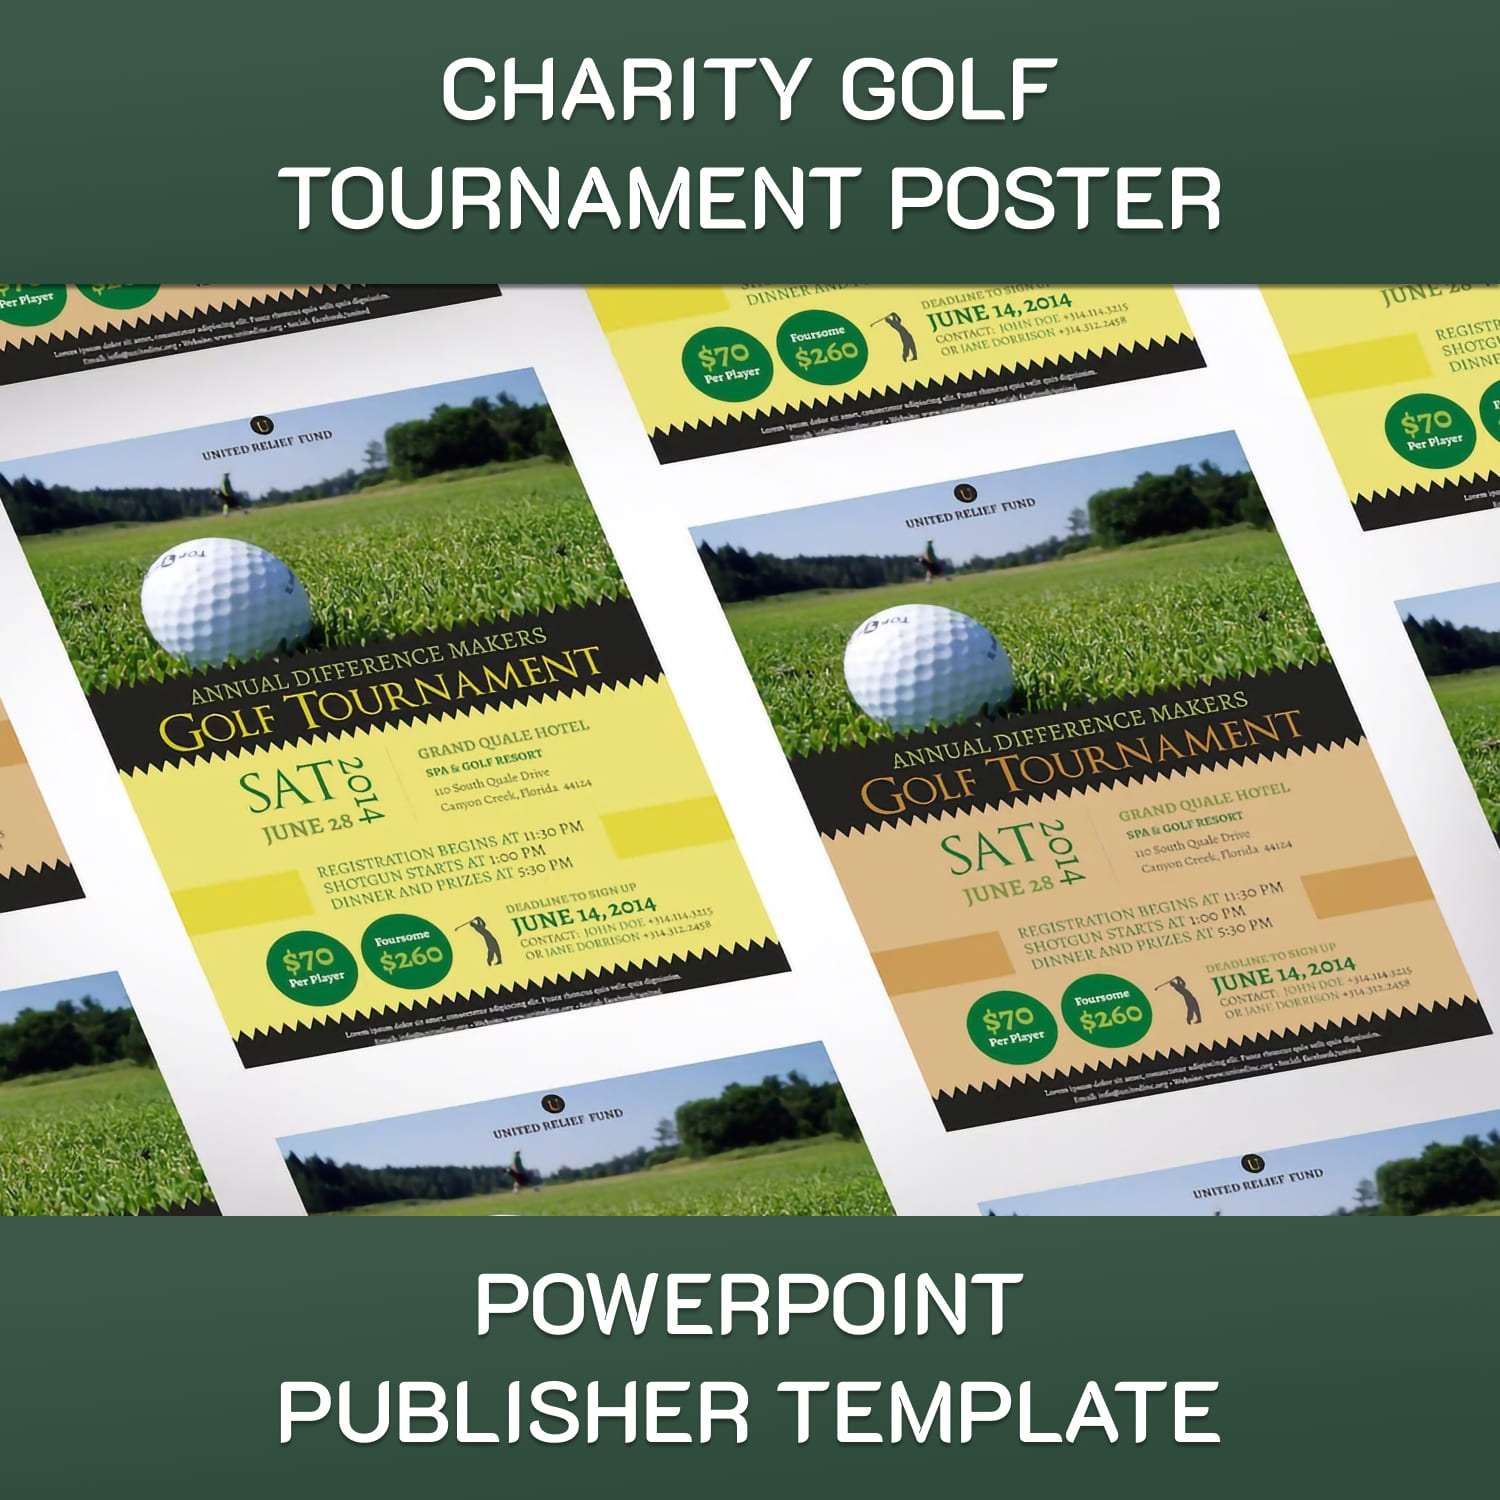 publisher poster templates